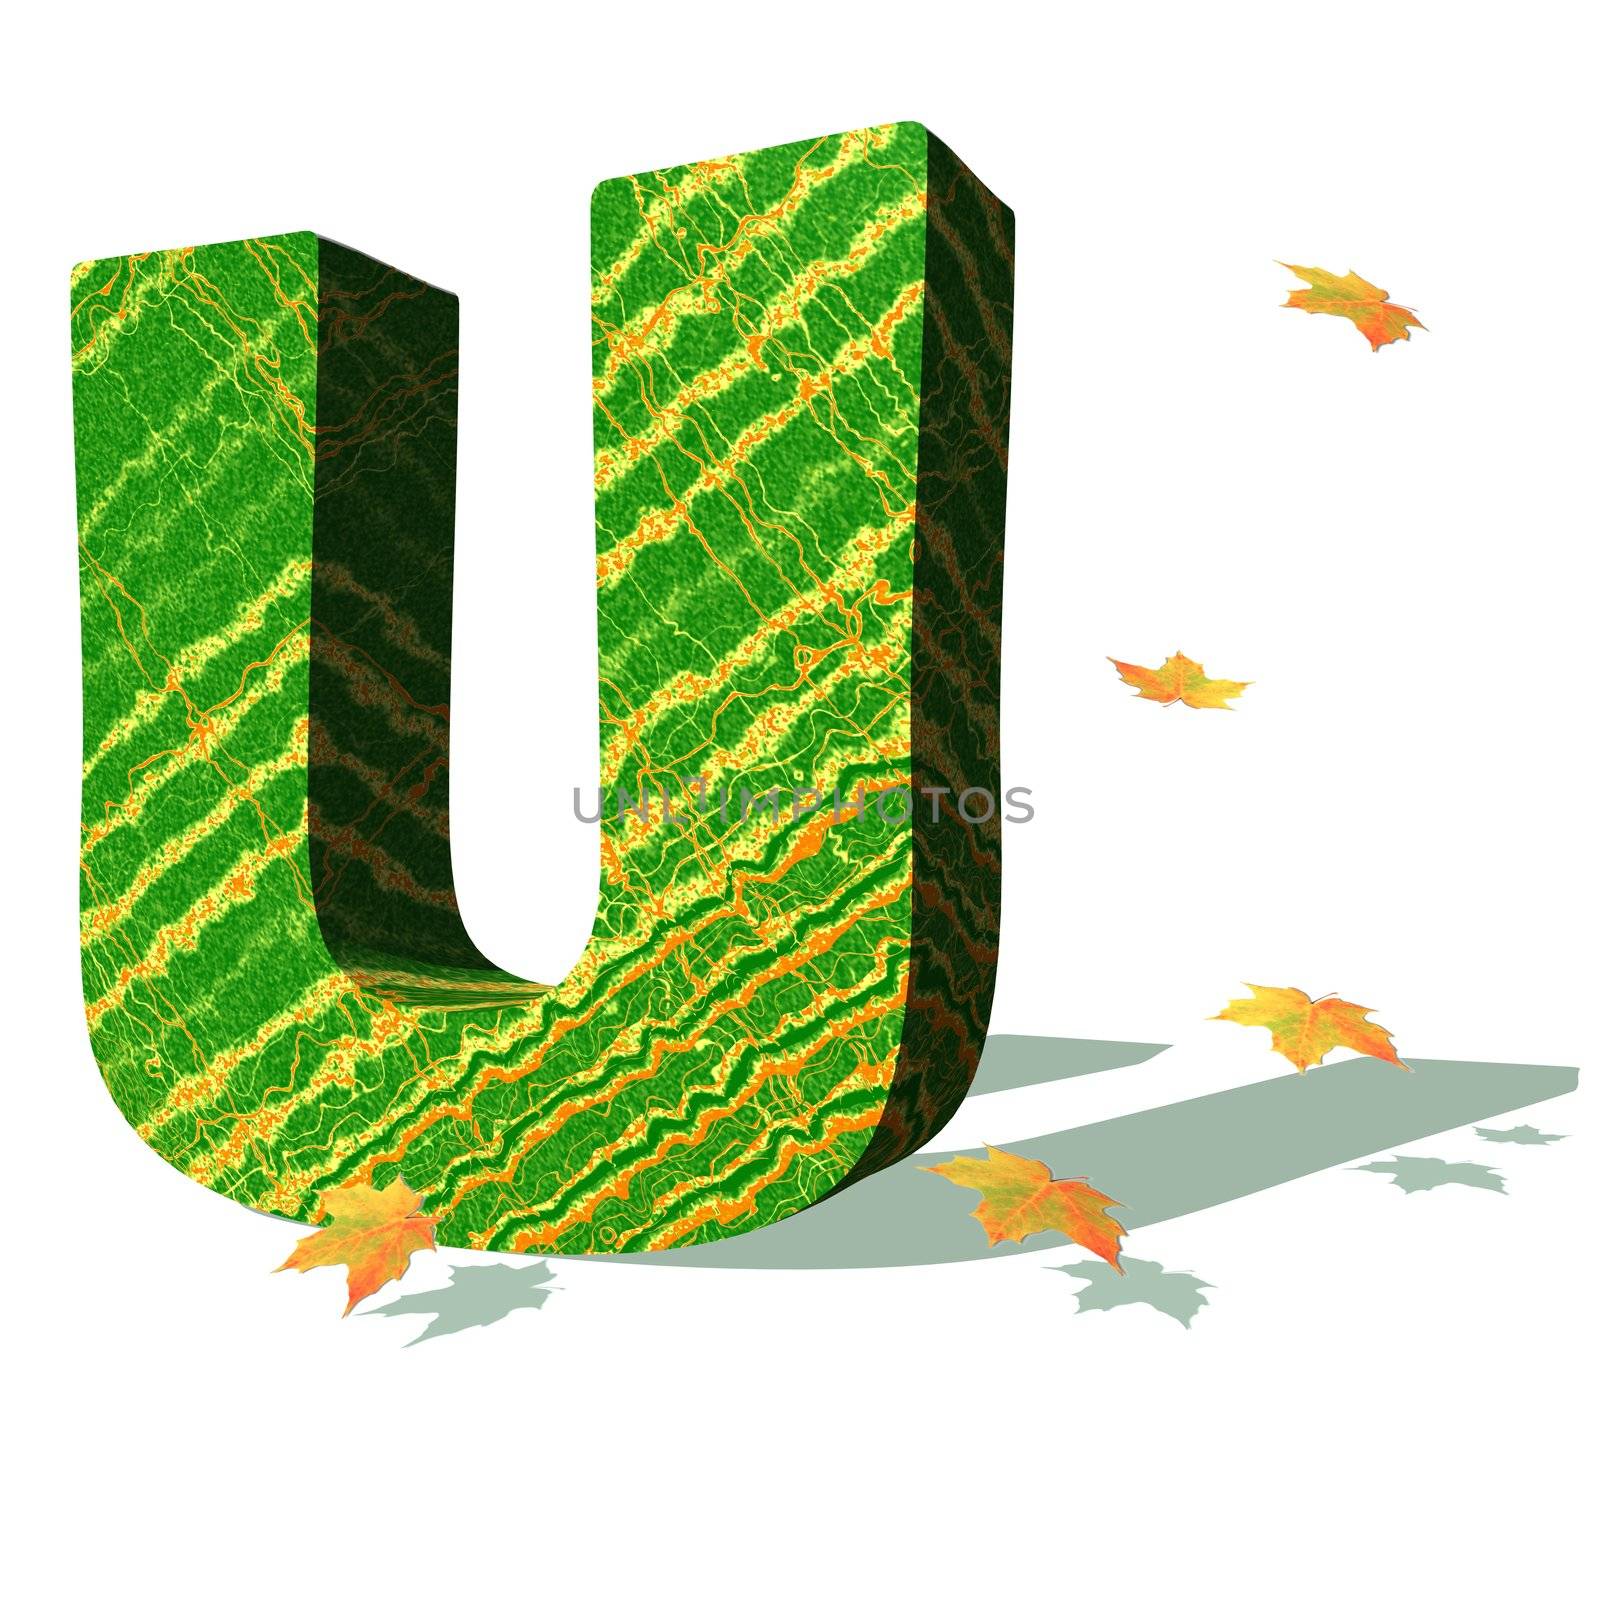 Green ecological U capital letter surrounded by few autumn falling leaves in a white background with shadows